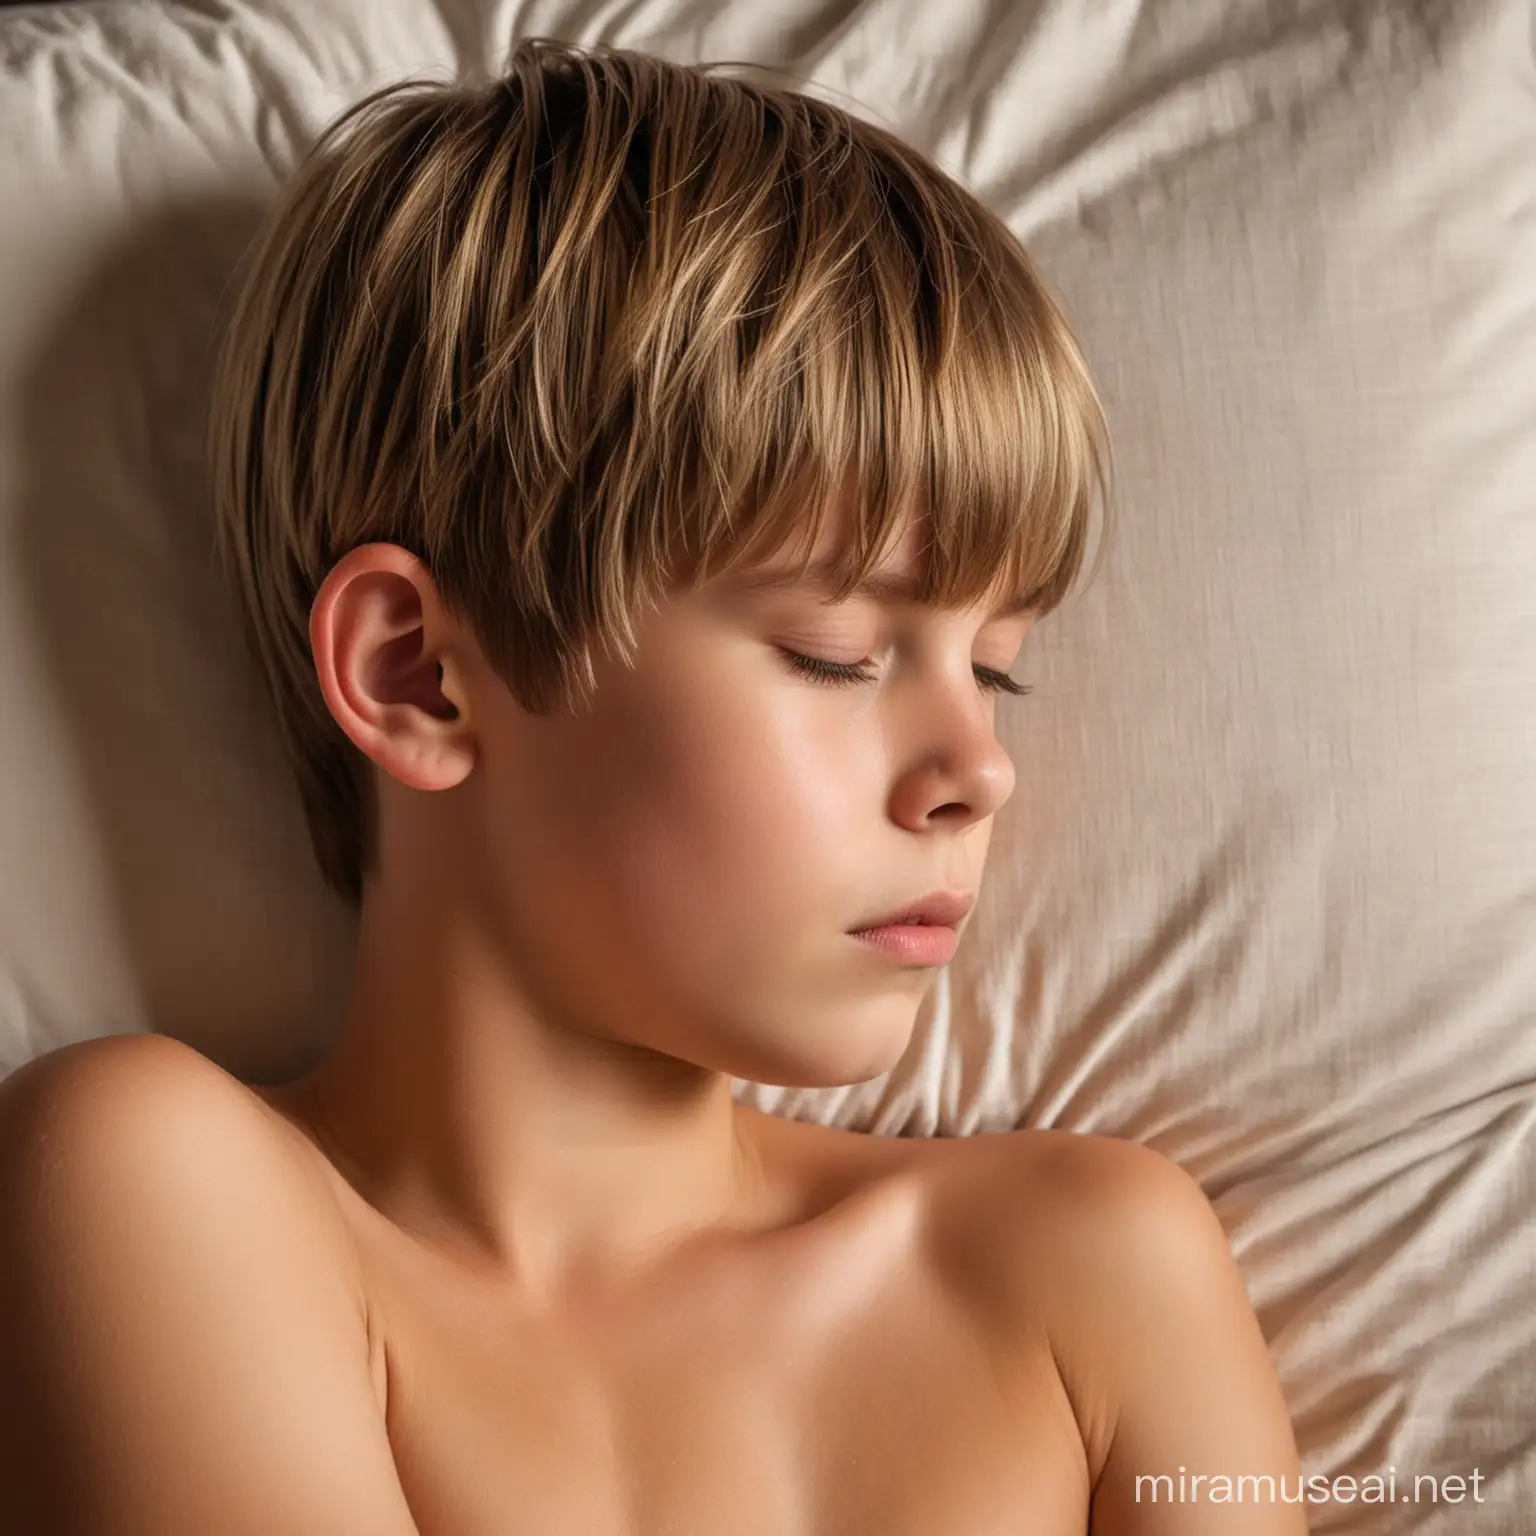 Thin 7year old sleeping boy, dark blond shiny hair, bowl cut, on pillow, bright light from a side, shirtless, closeup